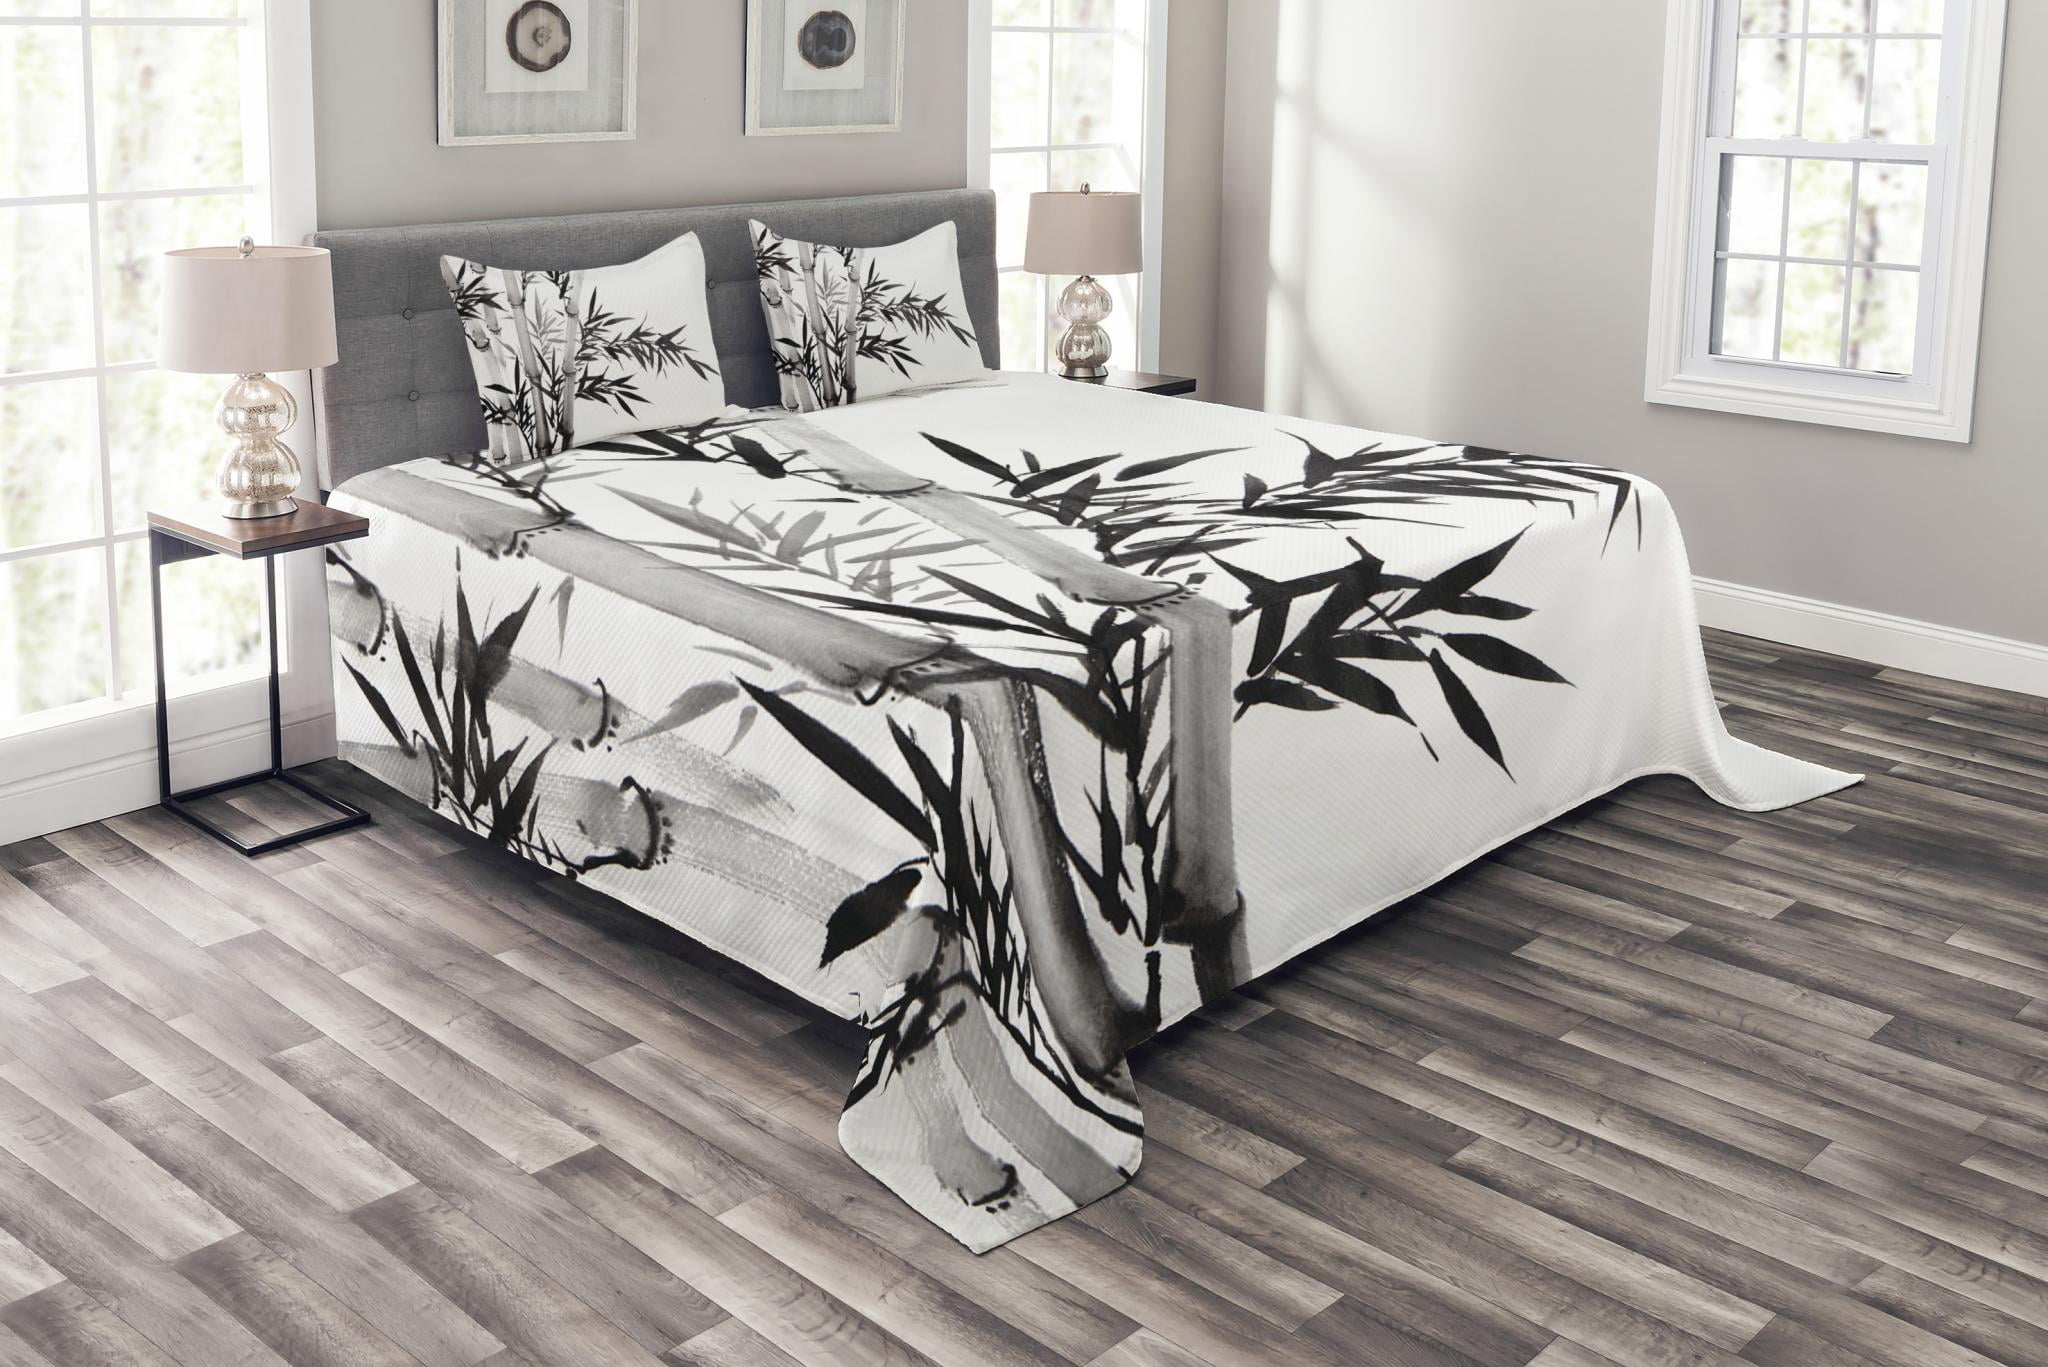 Ambesonne Bamboo Duvet Cover Set King Size Charcoal Grey White Bamboo Tree Illustration Traditional Chinese Calligraphy Style Asian Culture Decorative 3 Piece Bedding Set with 2 Pillow Shams